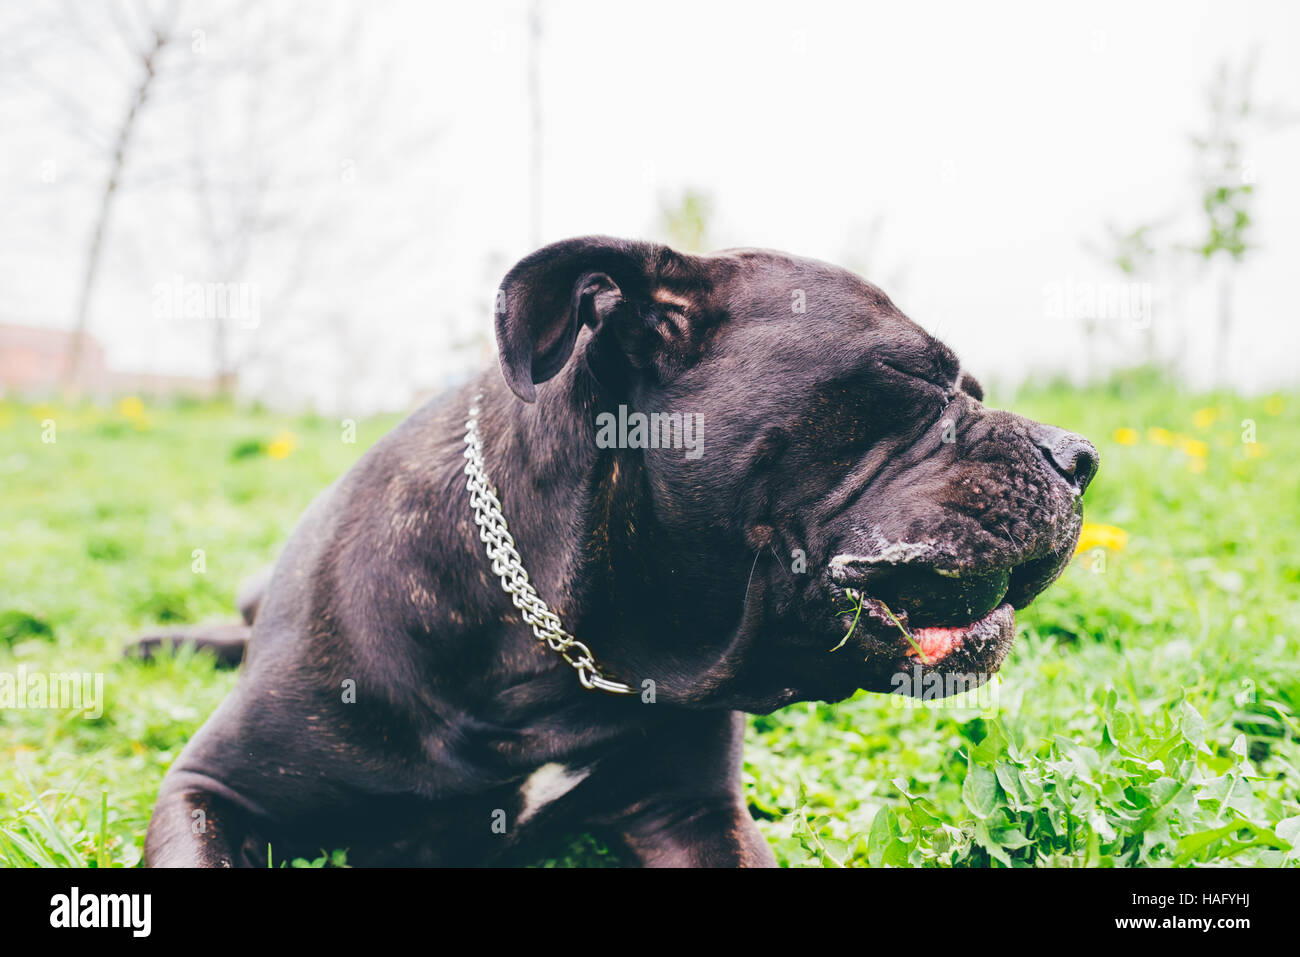 Dog sleeping sitting on the grass outdoor in a park Stock Photo